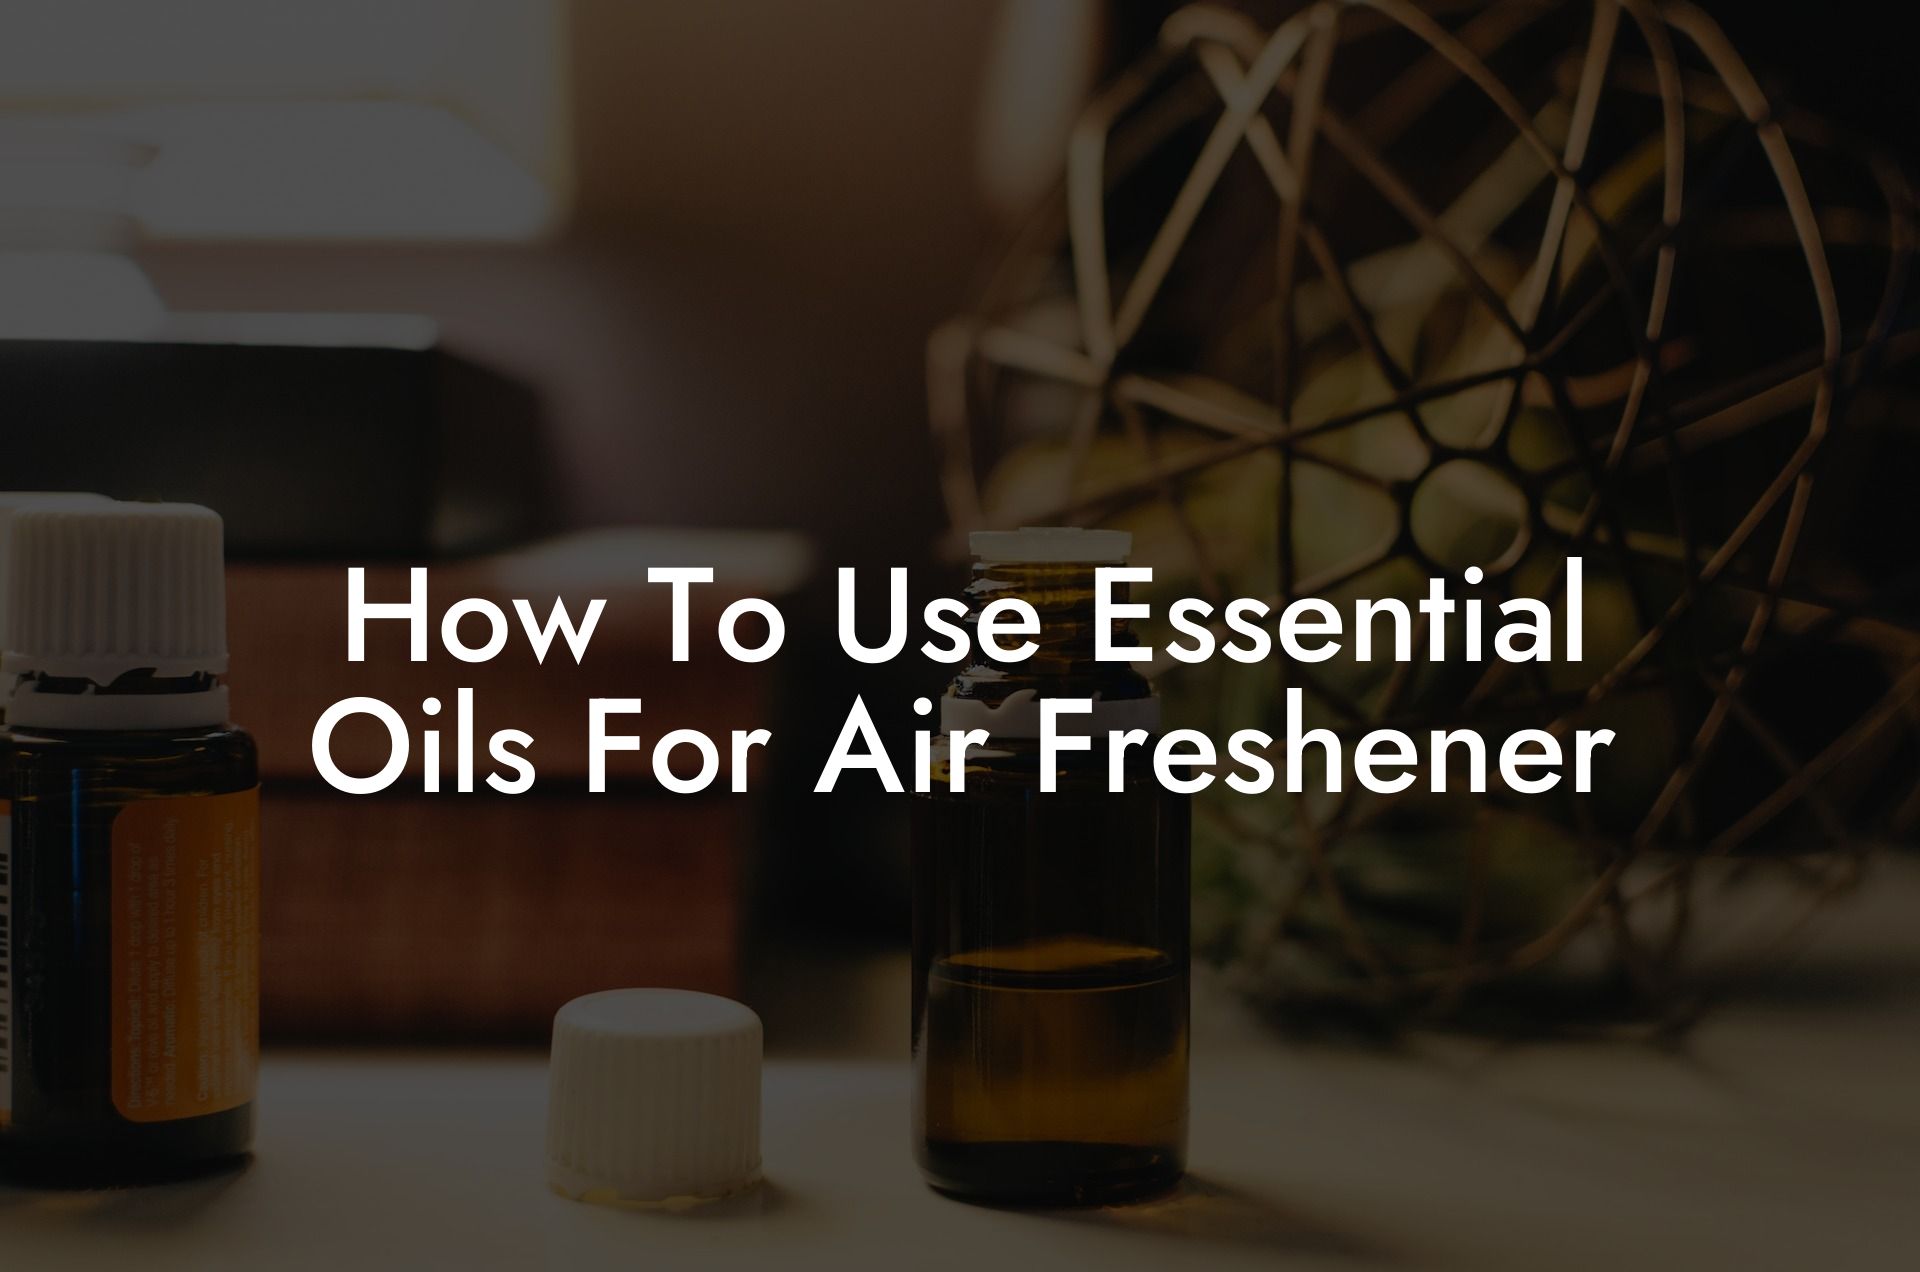 How To Use Essential Oils For Air Freshener